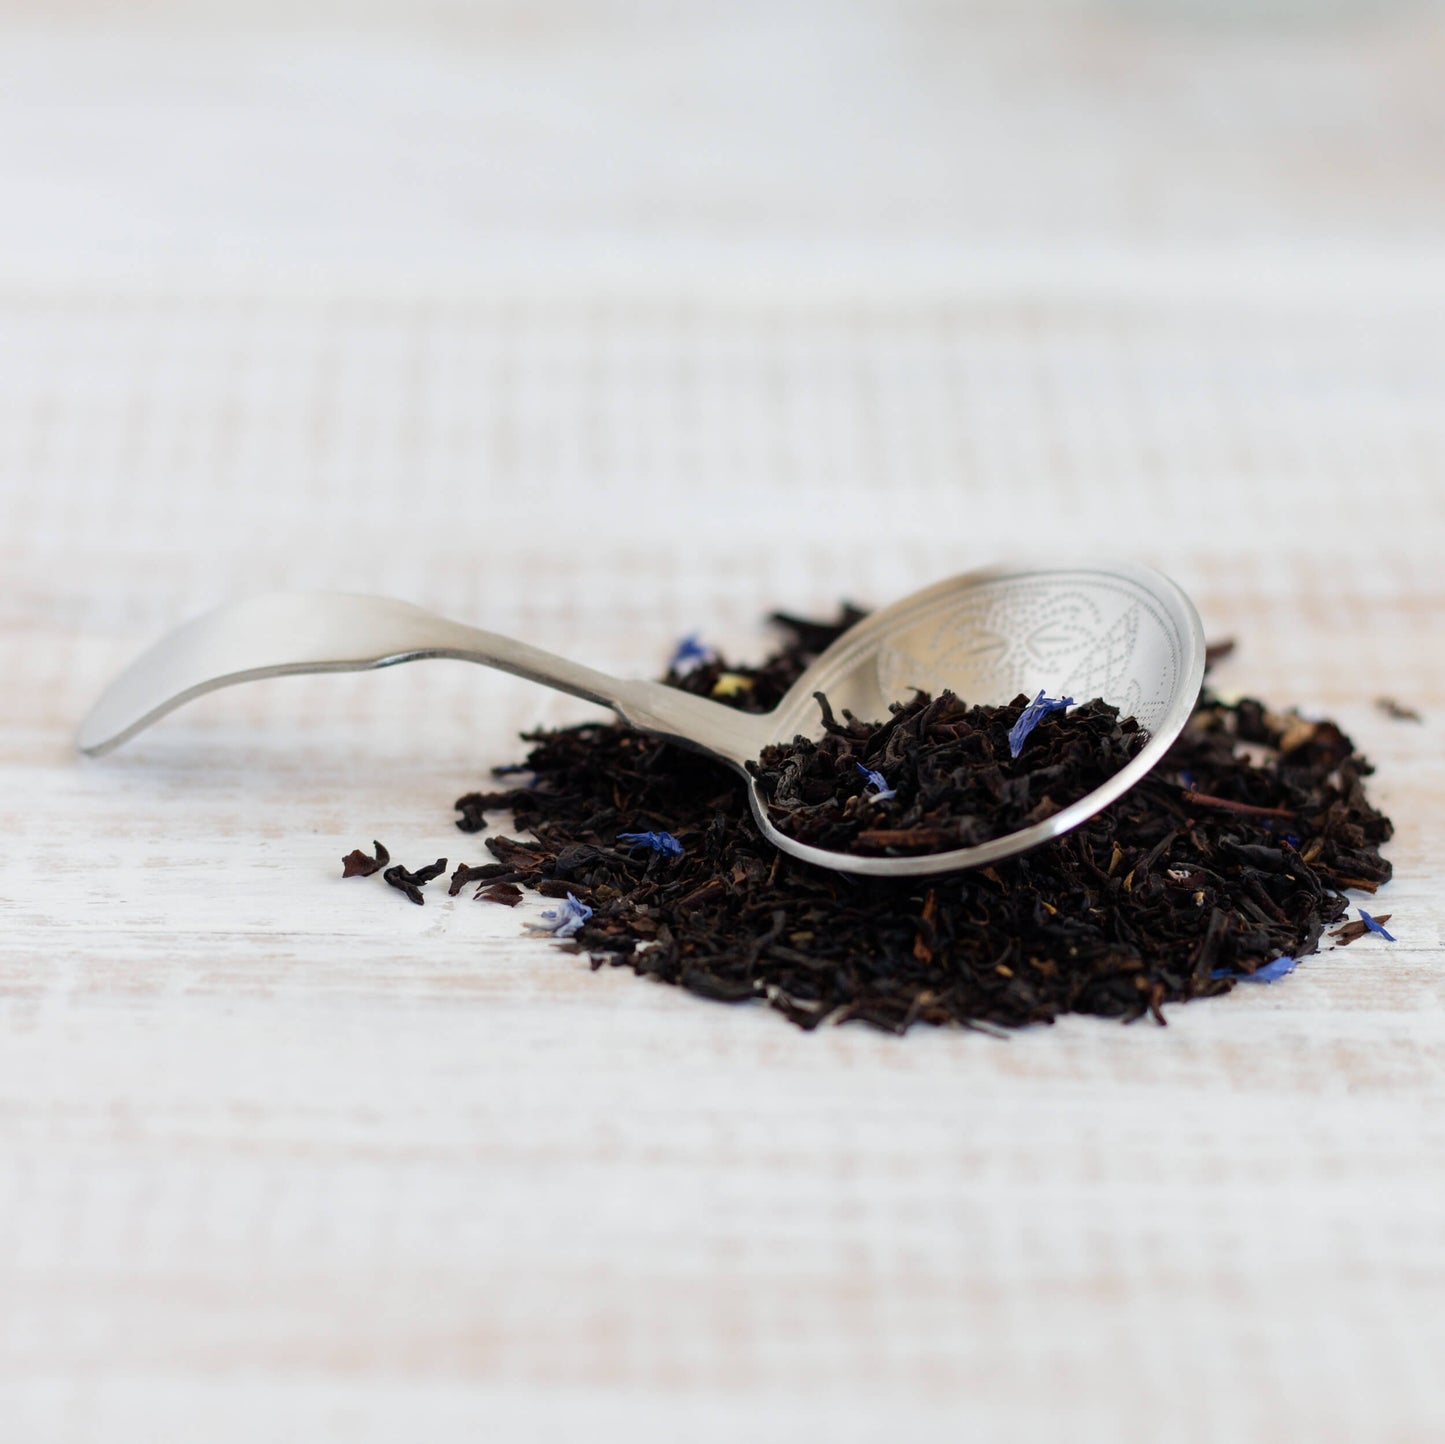 Black Currant Black Tea shown as loose tea leaves in a small pile, with a silver scoop on top with more tea leaves